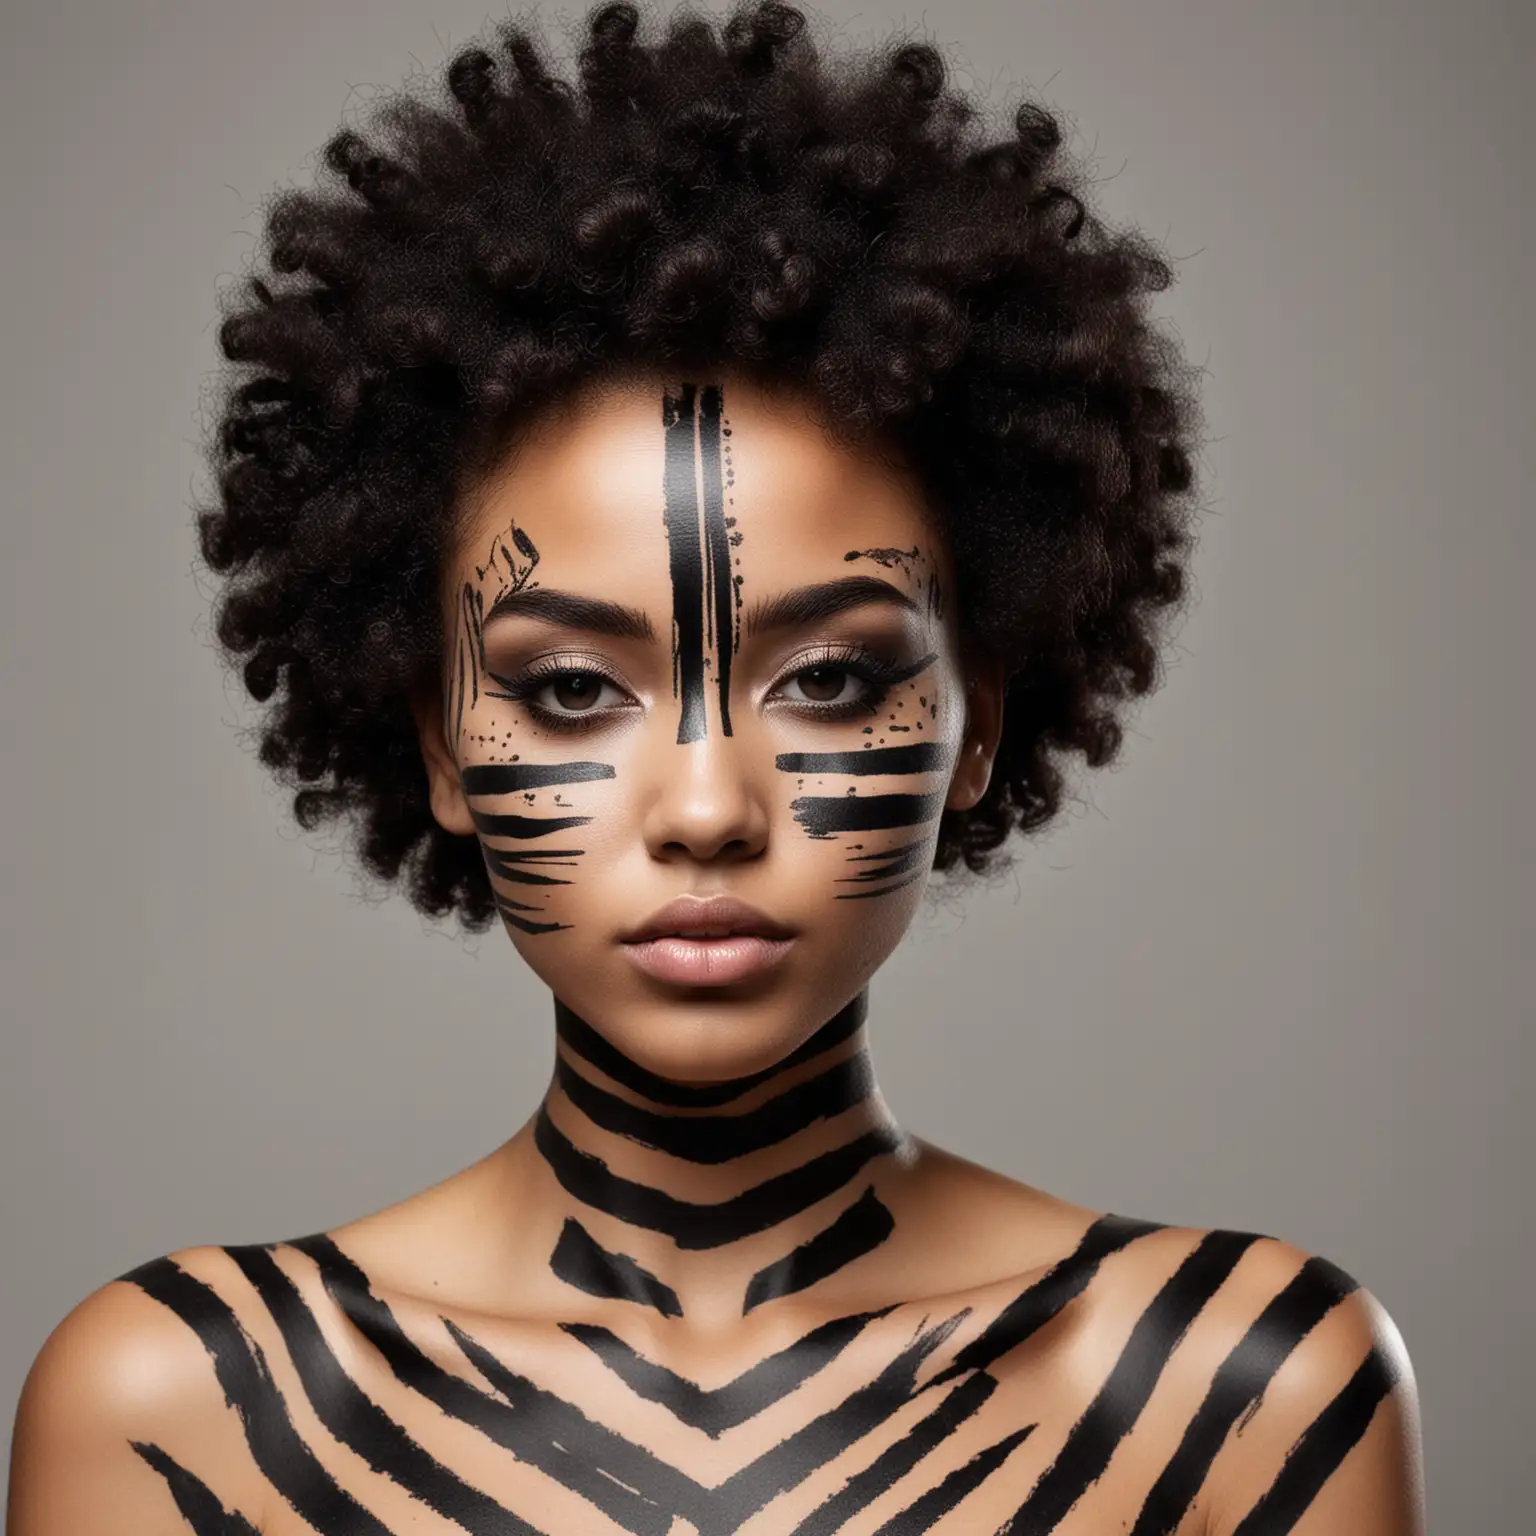 Afrohaired-Girl-with-Striking-Black-Face-Art